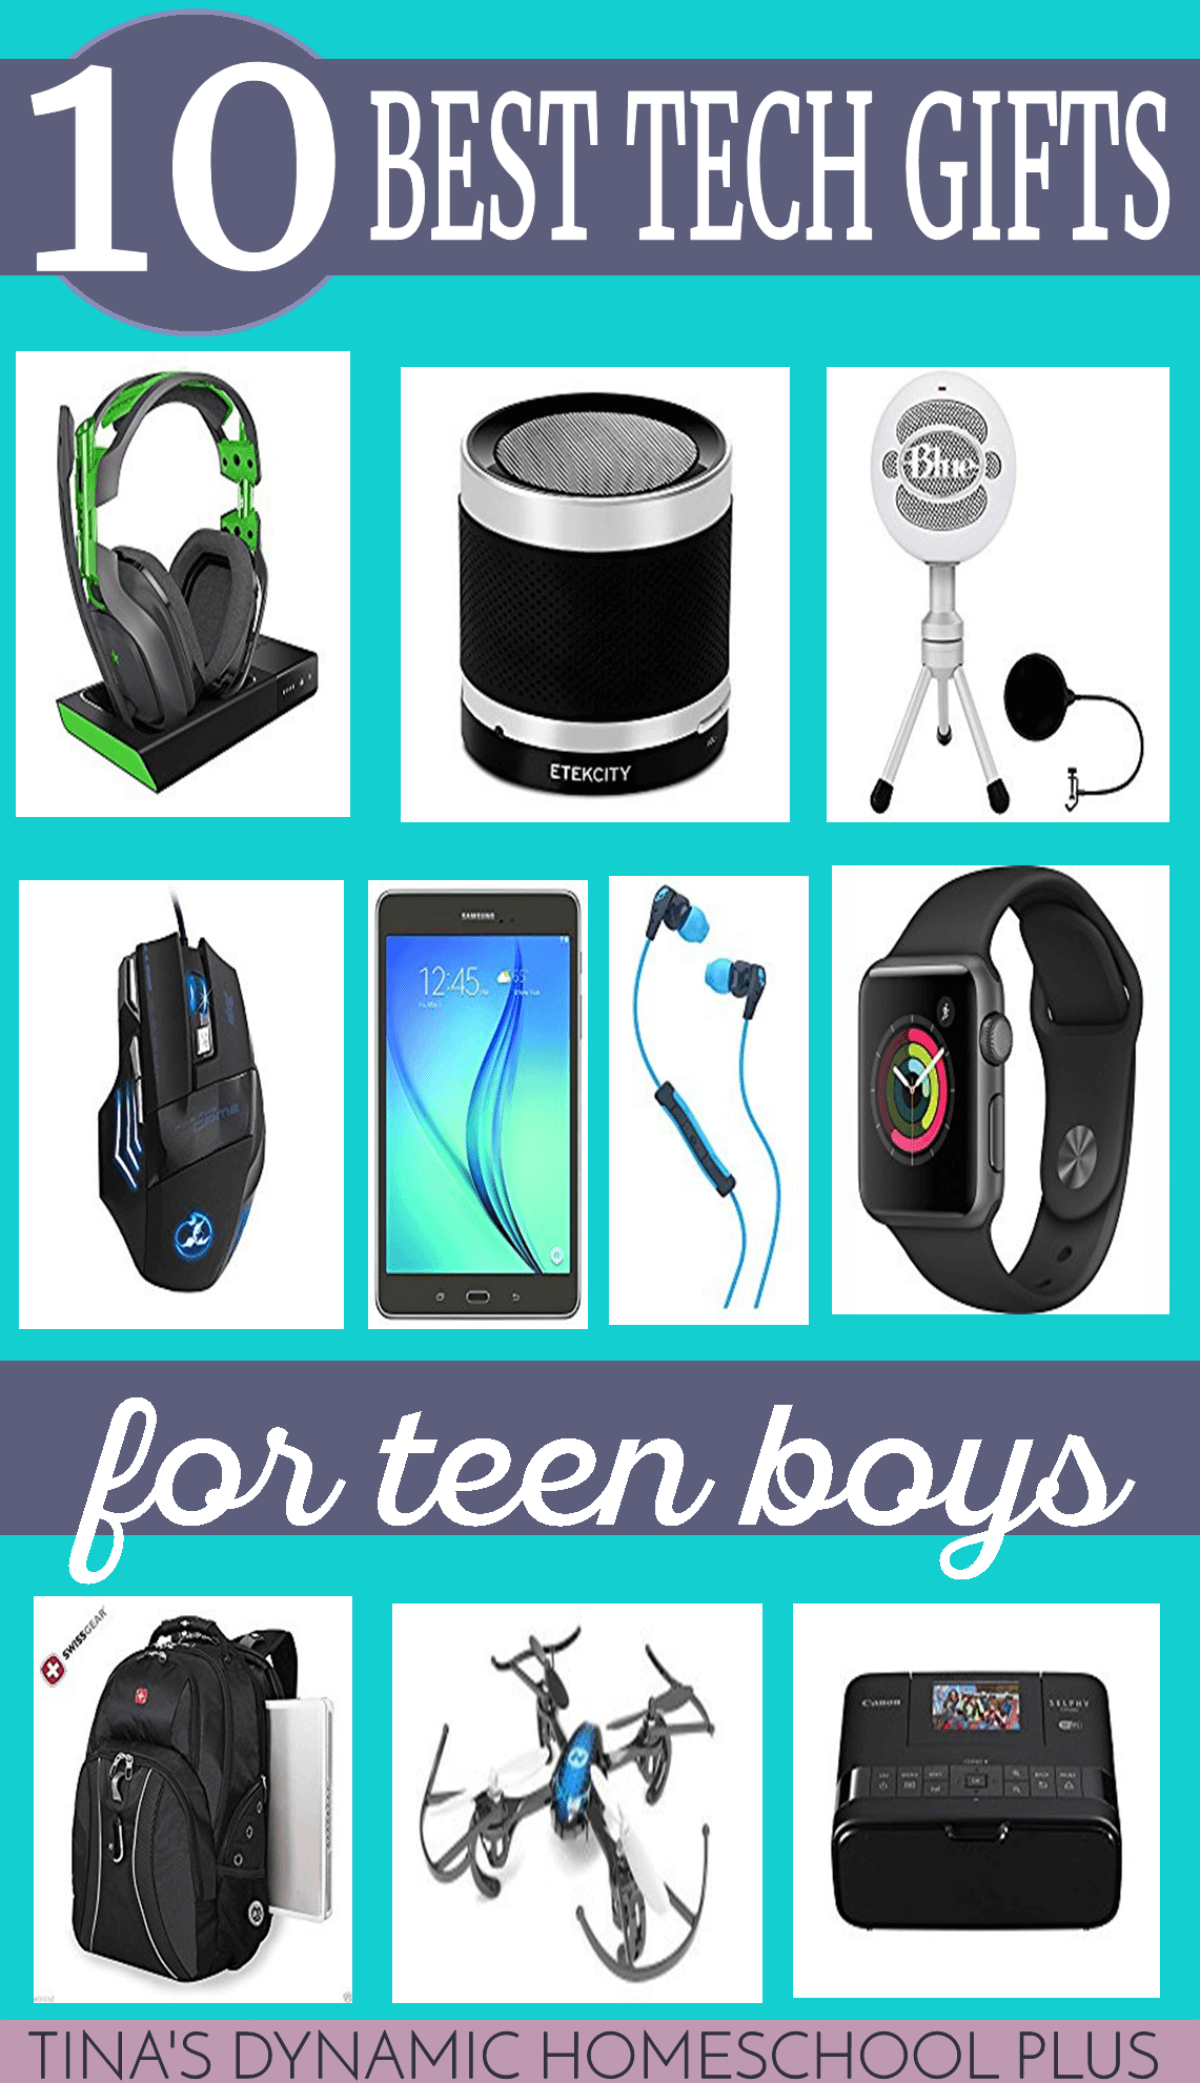 Editor's Choice: The Best Tech Gifts for Back To School